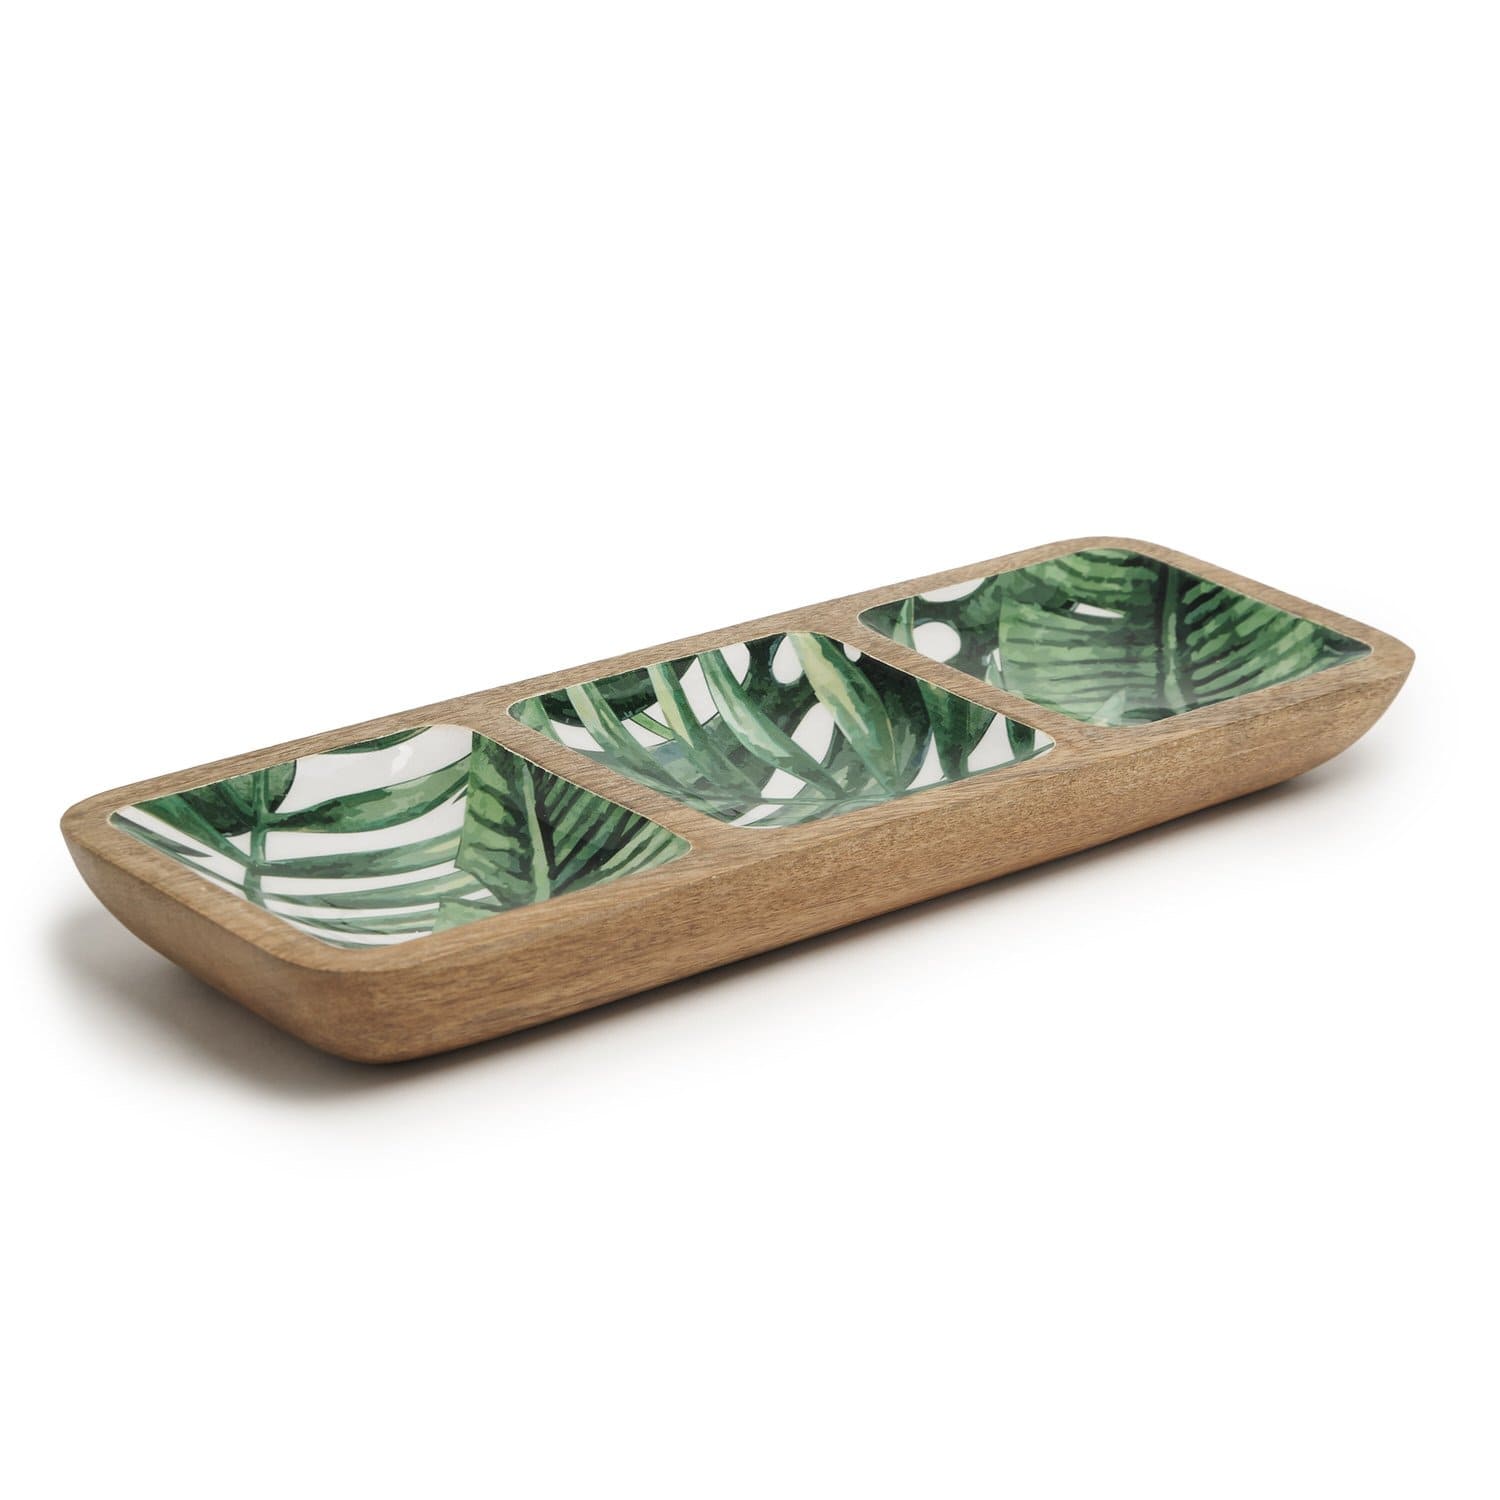 INDRA DALE TRAY 15x5 INCHES